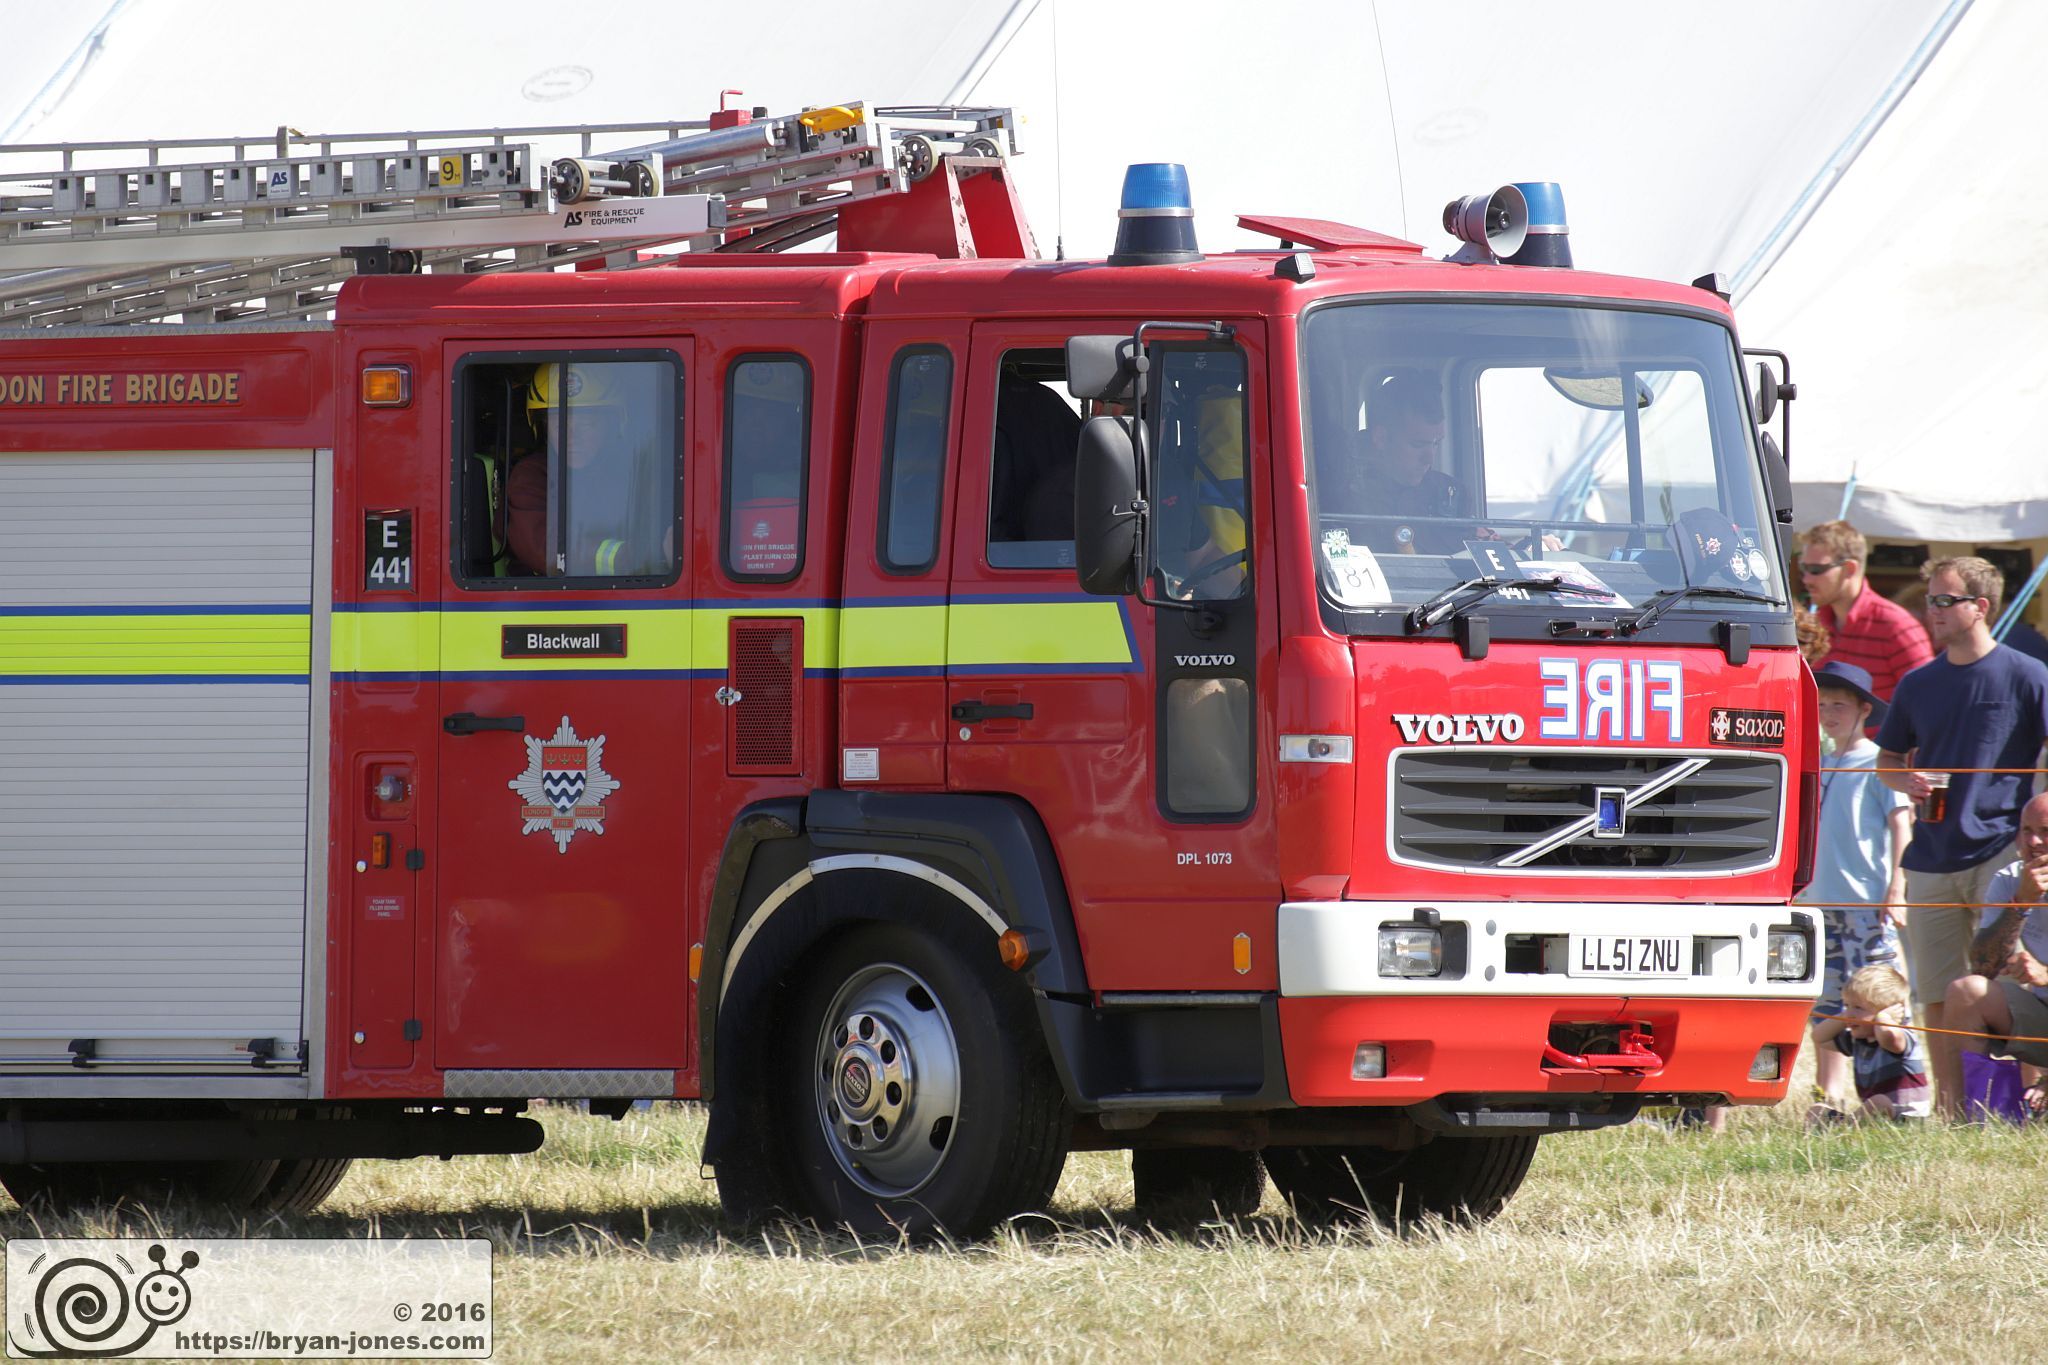 2016 Odiham Fire Show 07-Aug-2016. London Fire Brigade Volvo Saxon running as E441 Blackwall for the ITV series "London's Burning". LL51ZNU